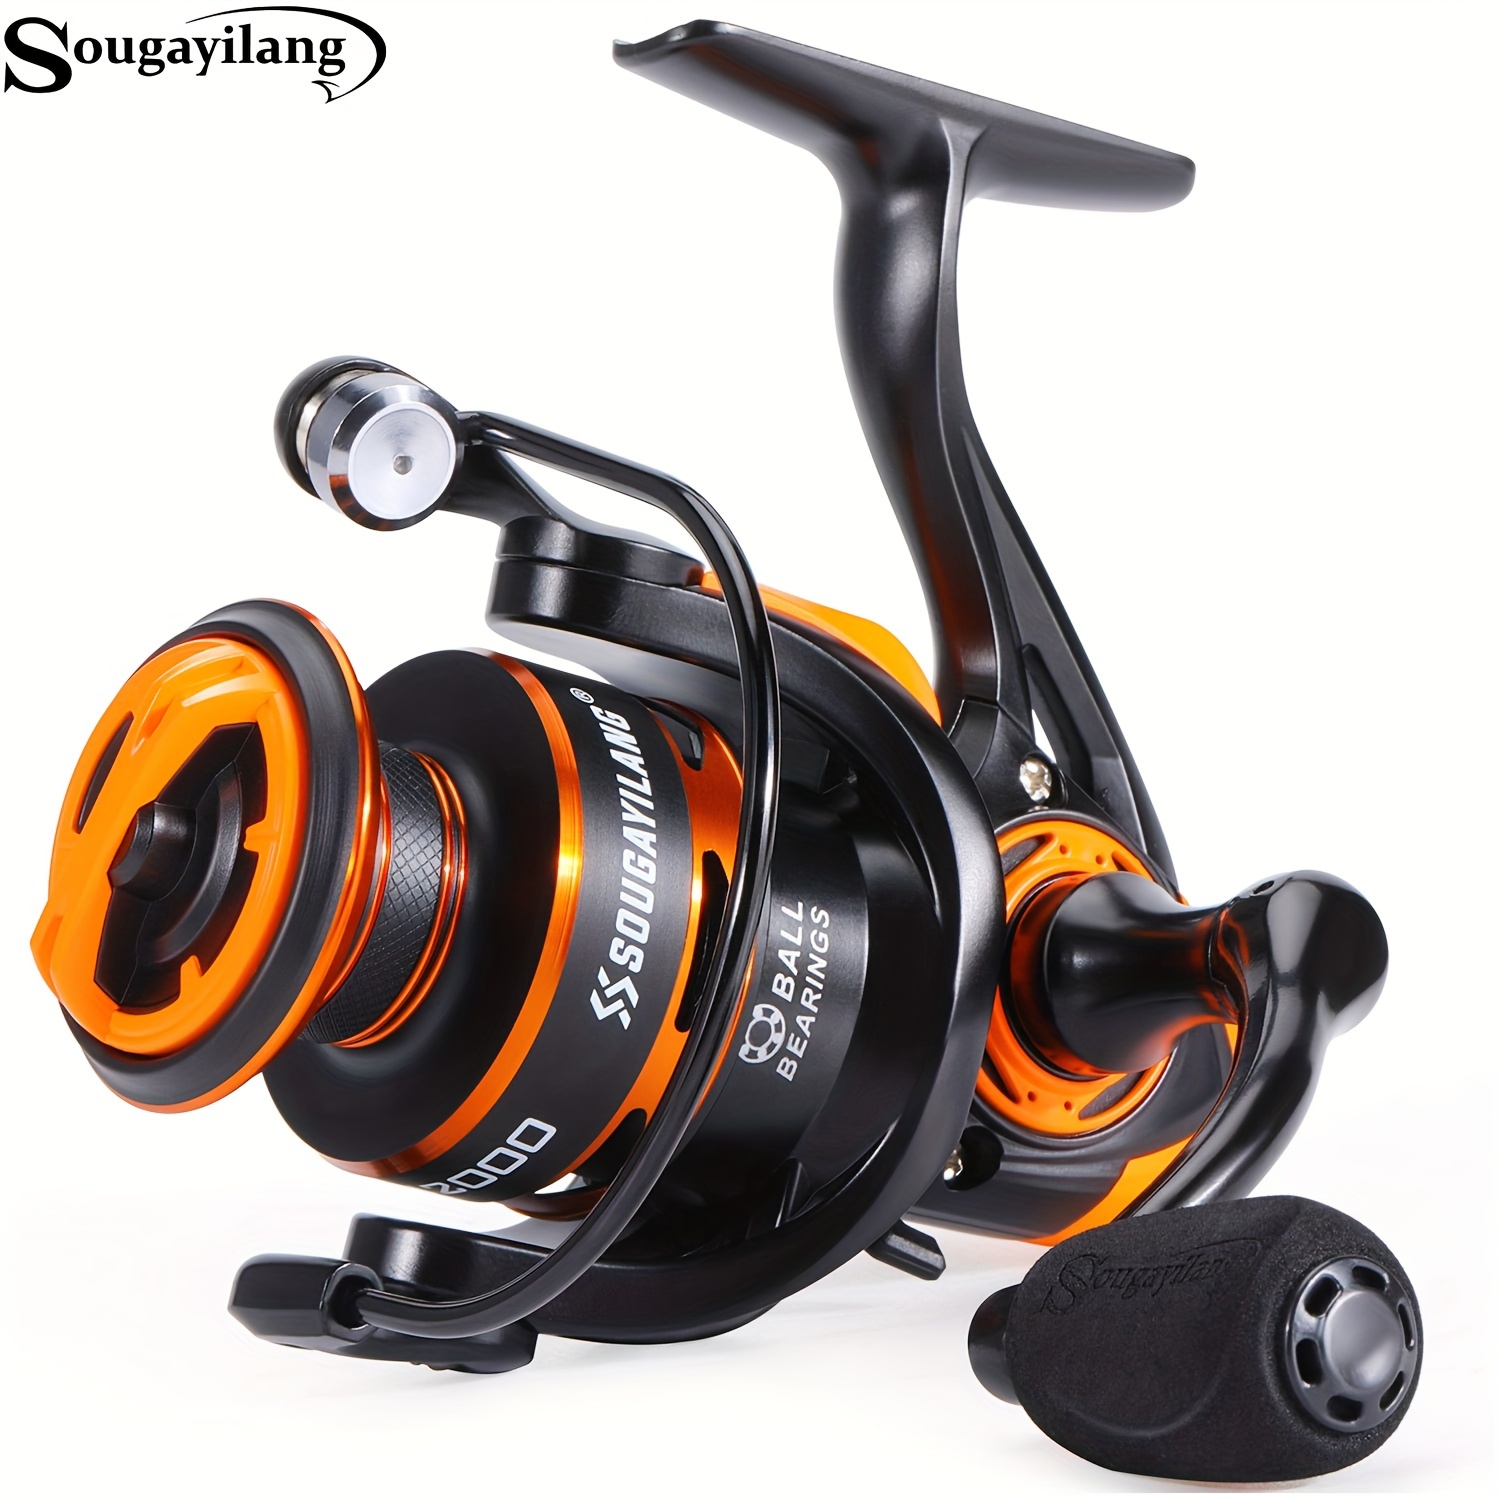 

Sougayilang Stainless Steel Spinning Reel With Foldable Eva Handle, 5.2:1 Gear Ratio Fishing Reel With 20lb/9kg Max Drag, Fishing Tackle For Bass Catfish Salmon